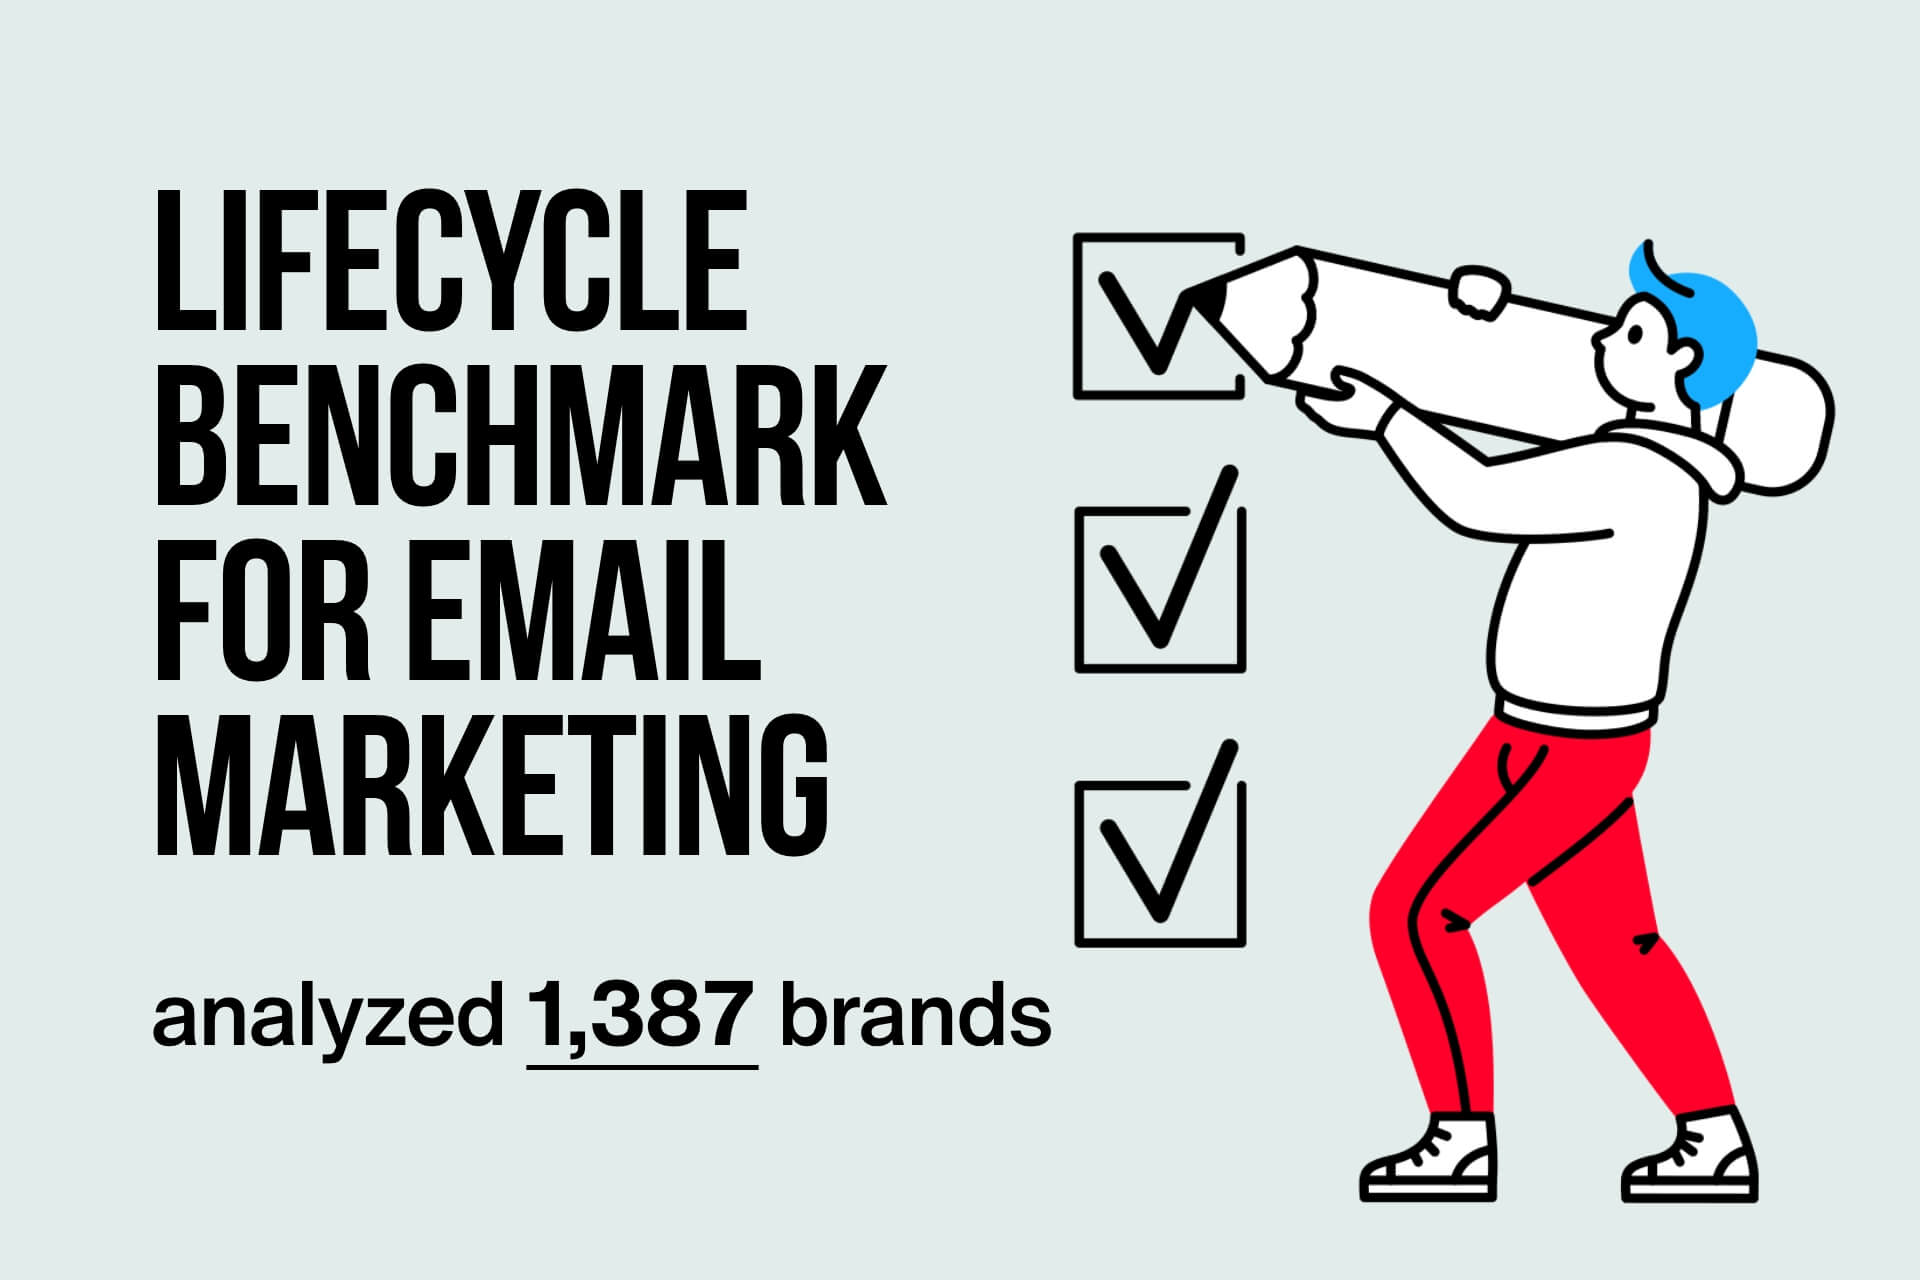 lifecycle benchmark report for email marketing different brand analysis a man browsing on his phone